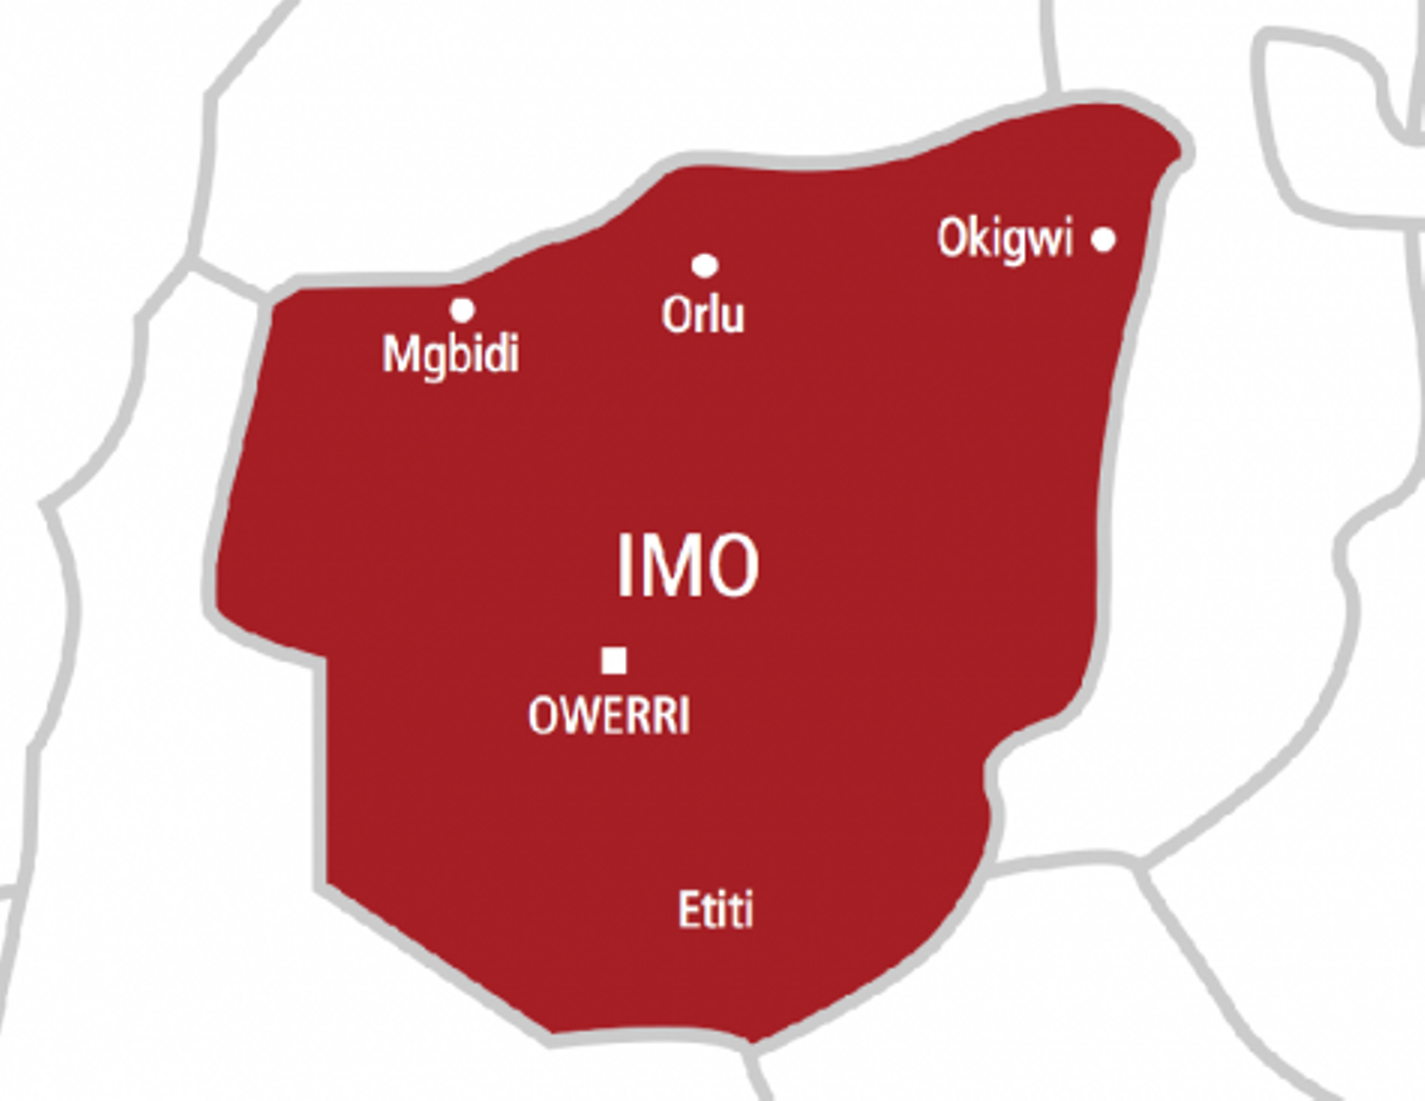 illegal oil refineries in Imo